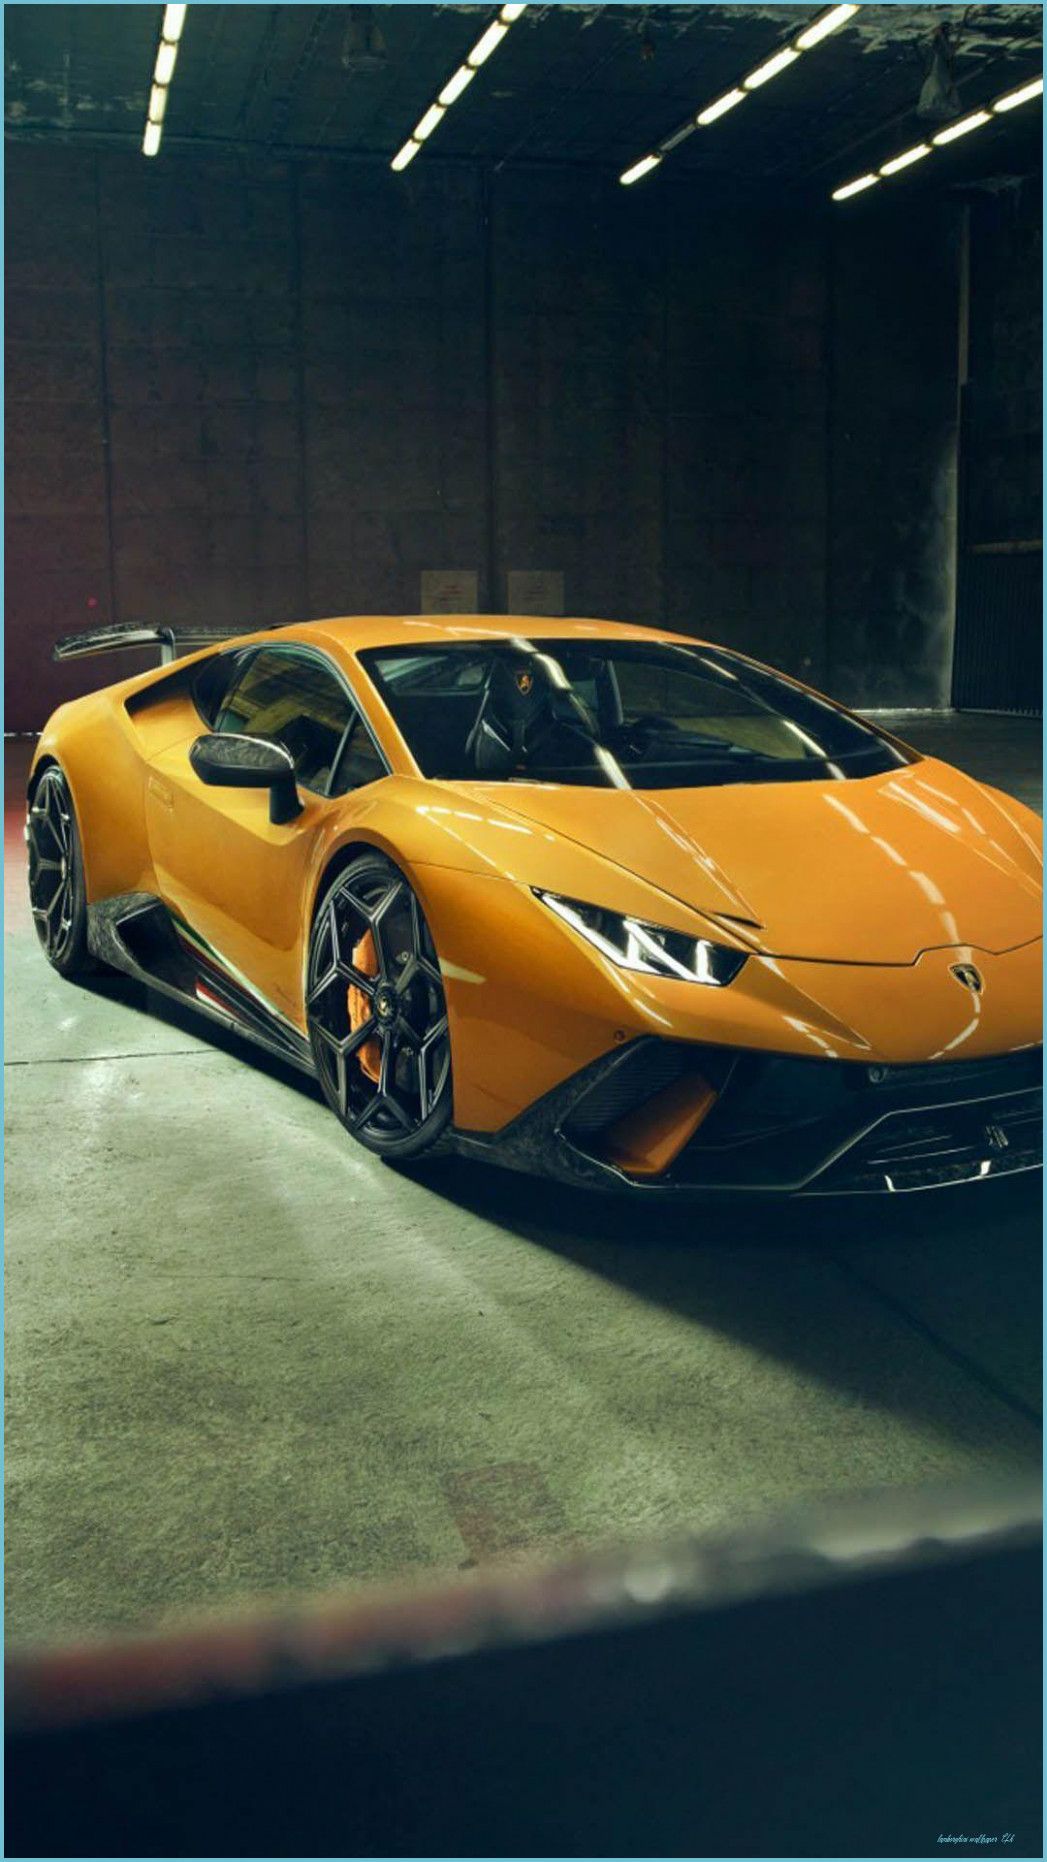 Why Is Lamborghini Wallpaper 14k Considered Underrated?